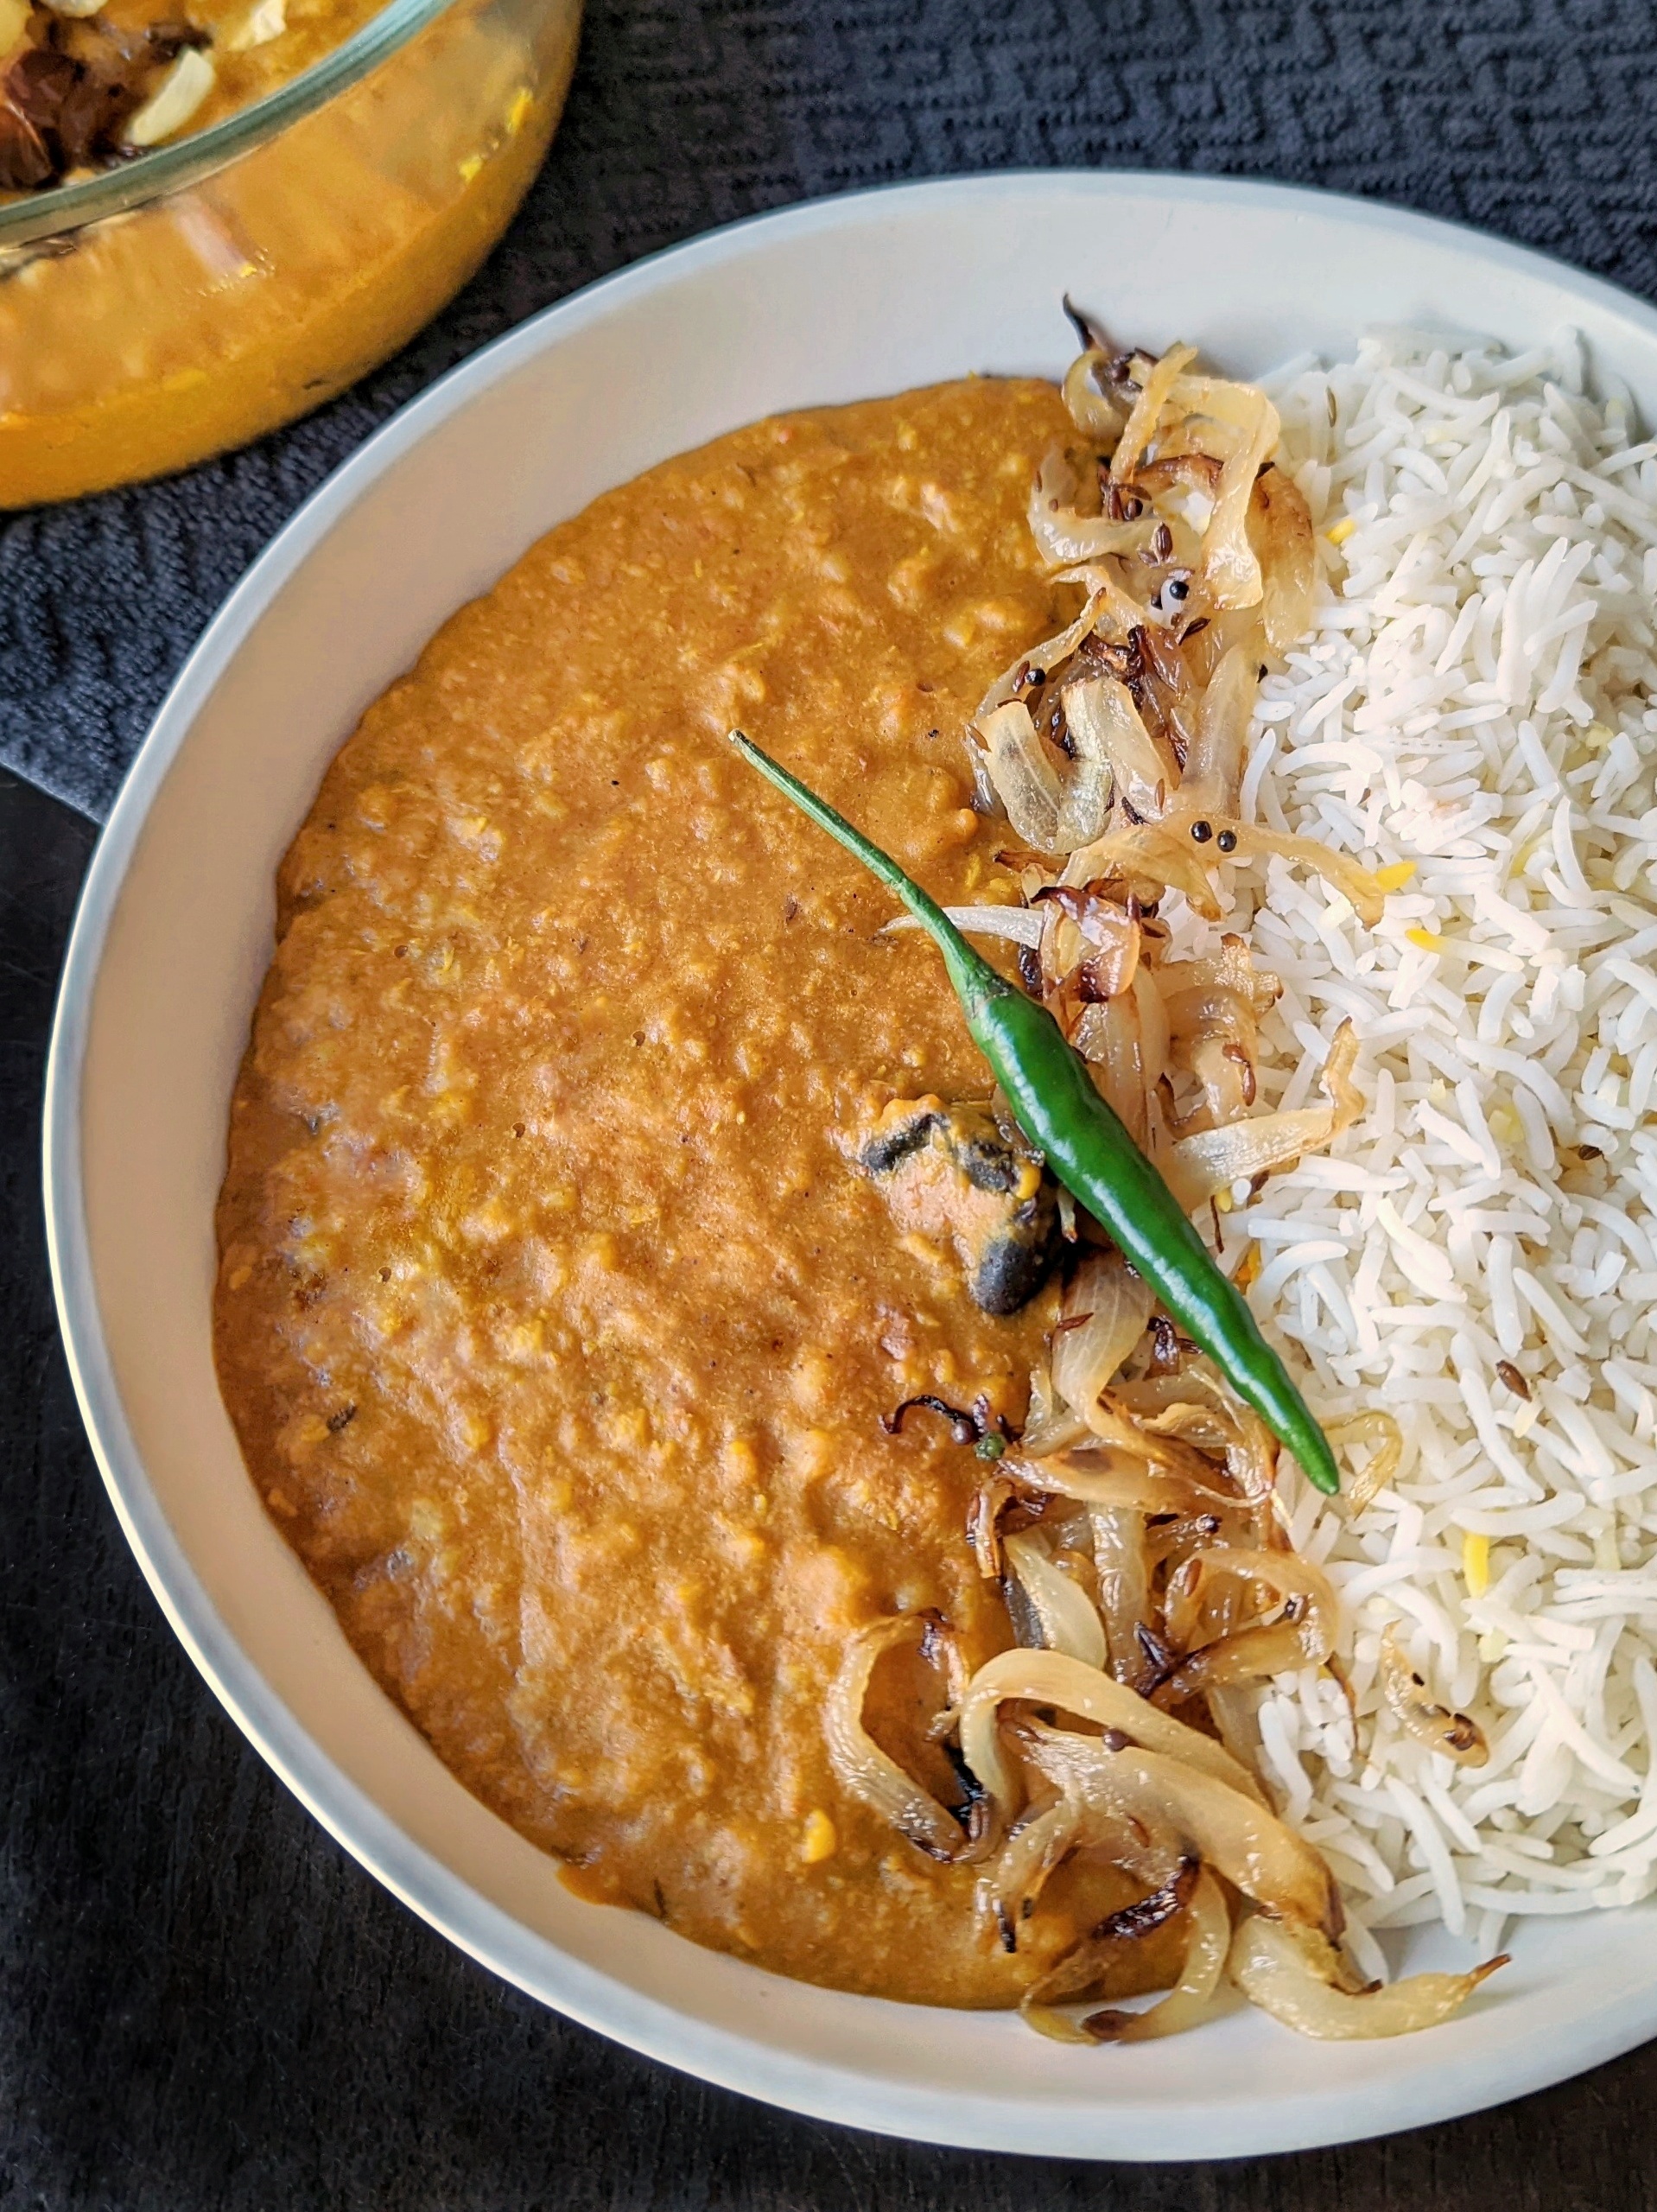 A single serving of Moong Dal with long-grained basmati rice.